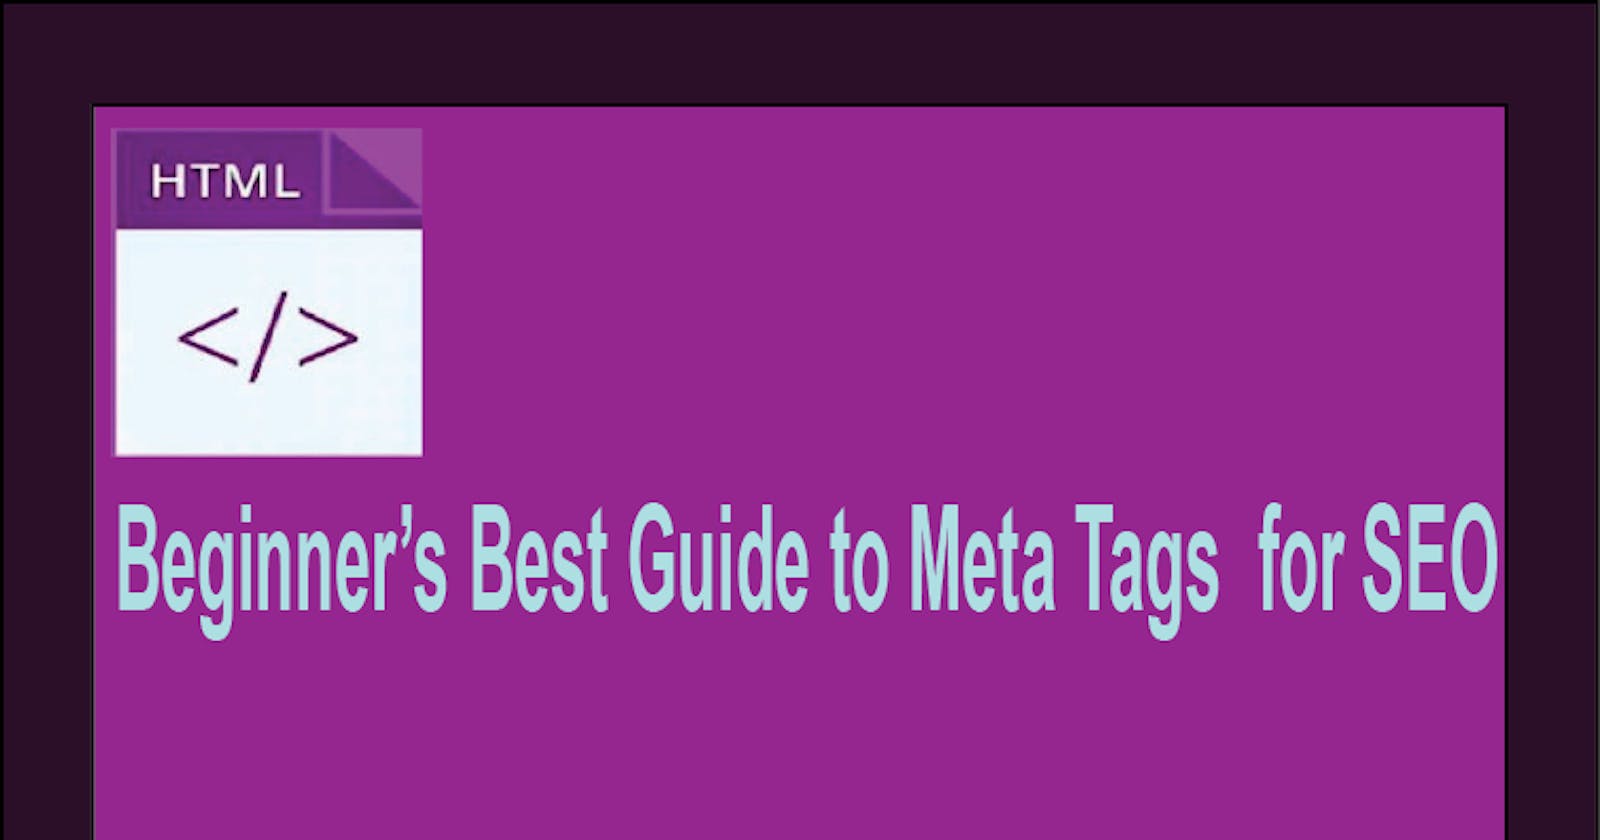 Beginner's Best Guide to Meta Tags for SEO.